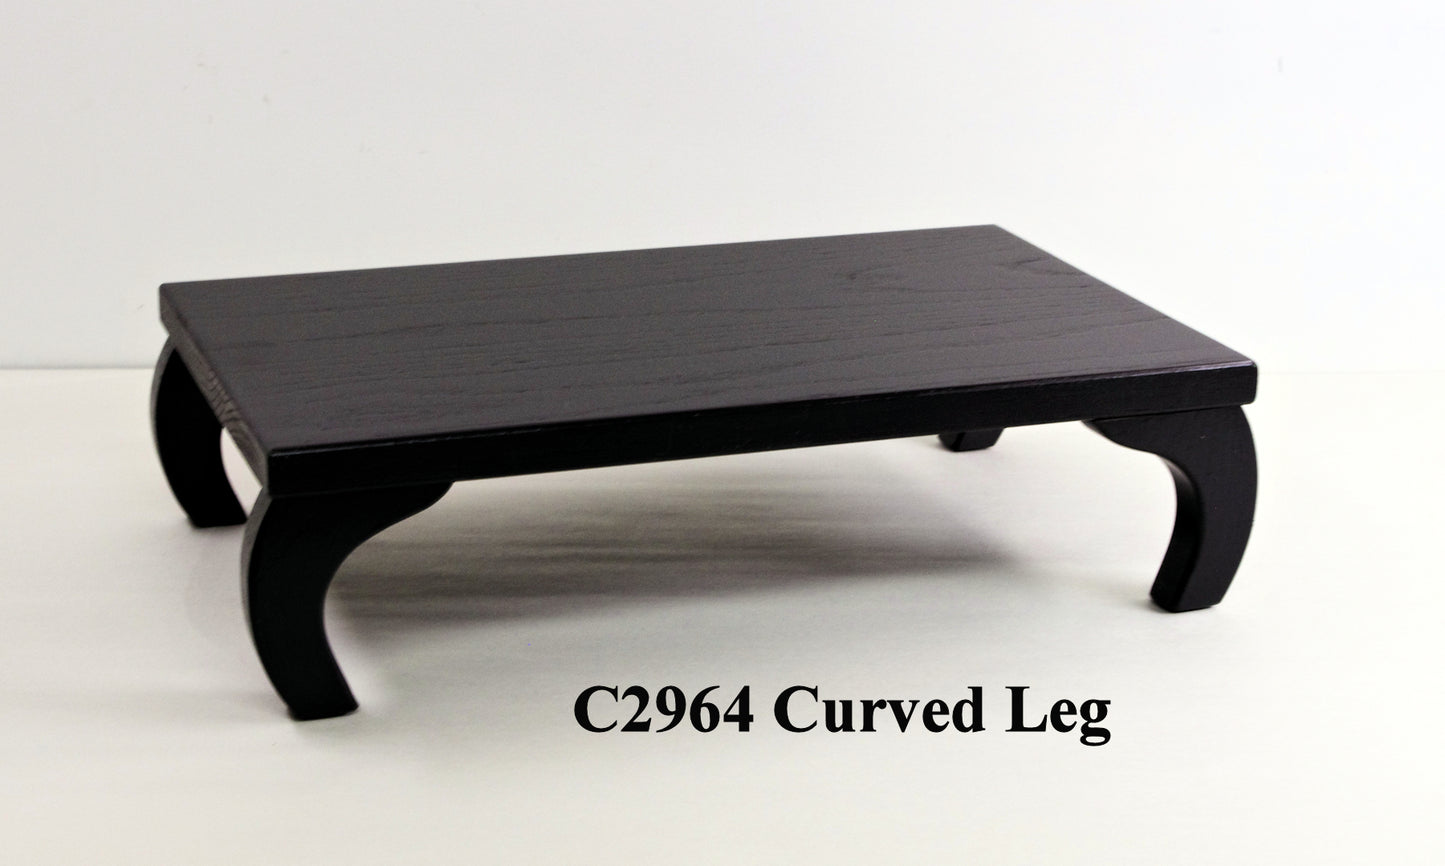 Bonsai Stand Curved Leg C2964 Made to Order 27" Length